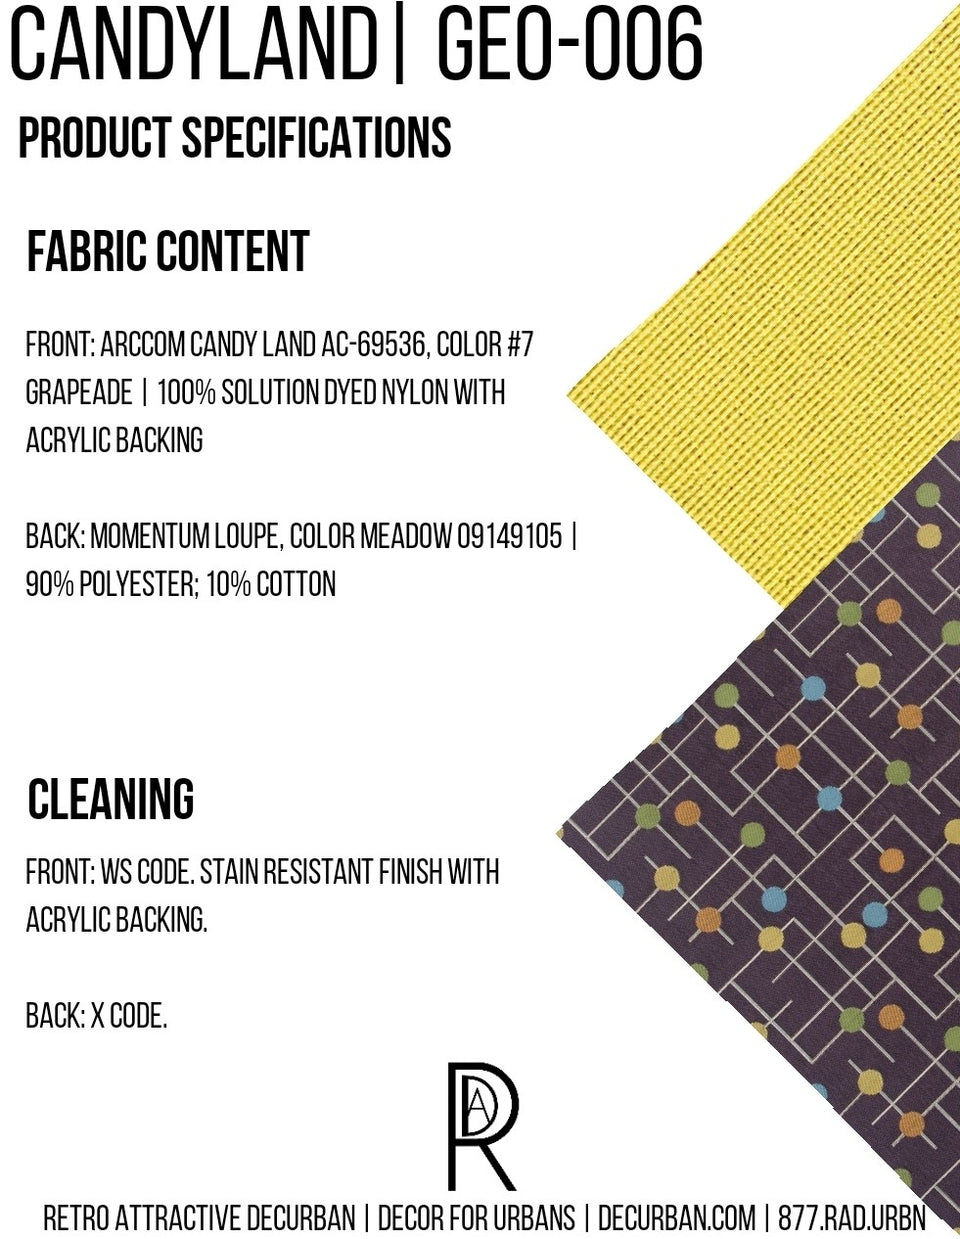 Decurban Candyland Fabric Specification Sheet